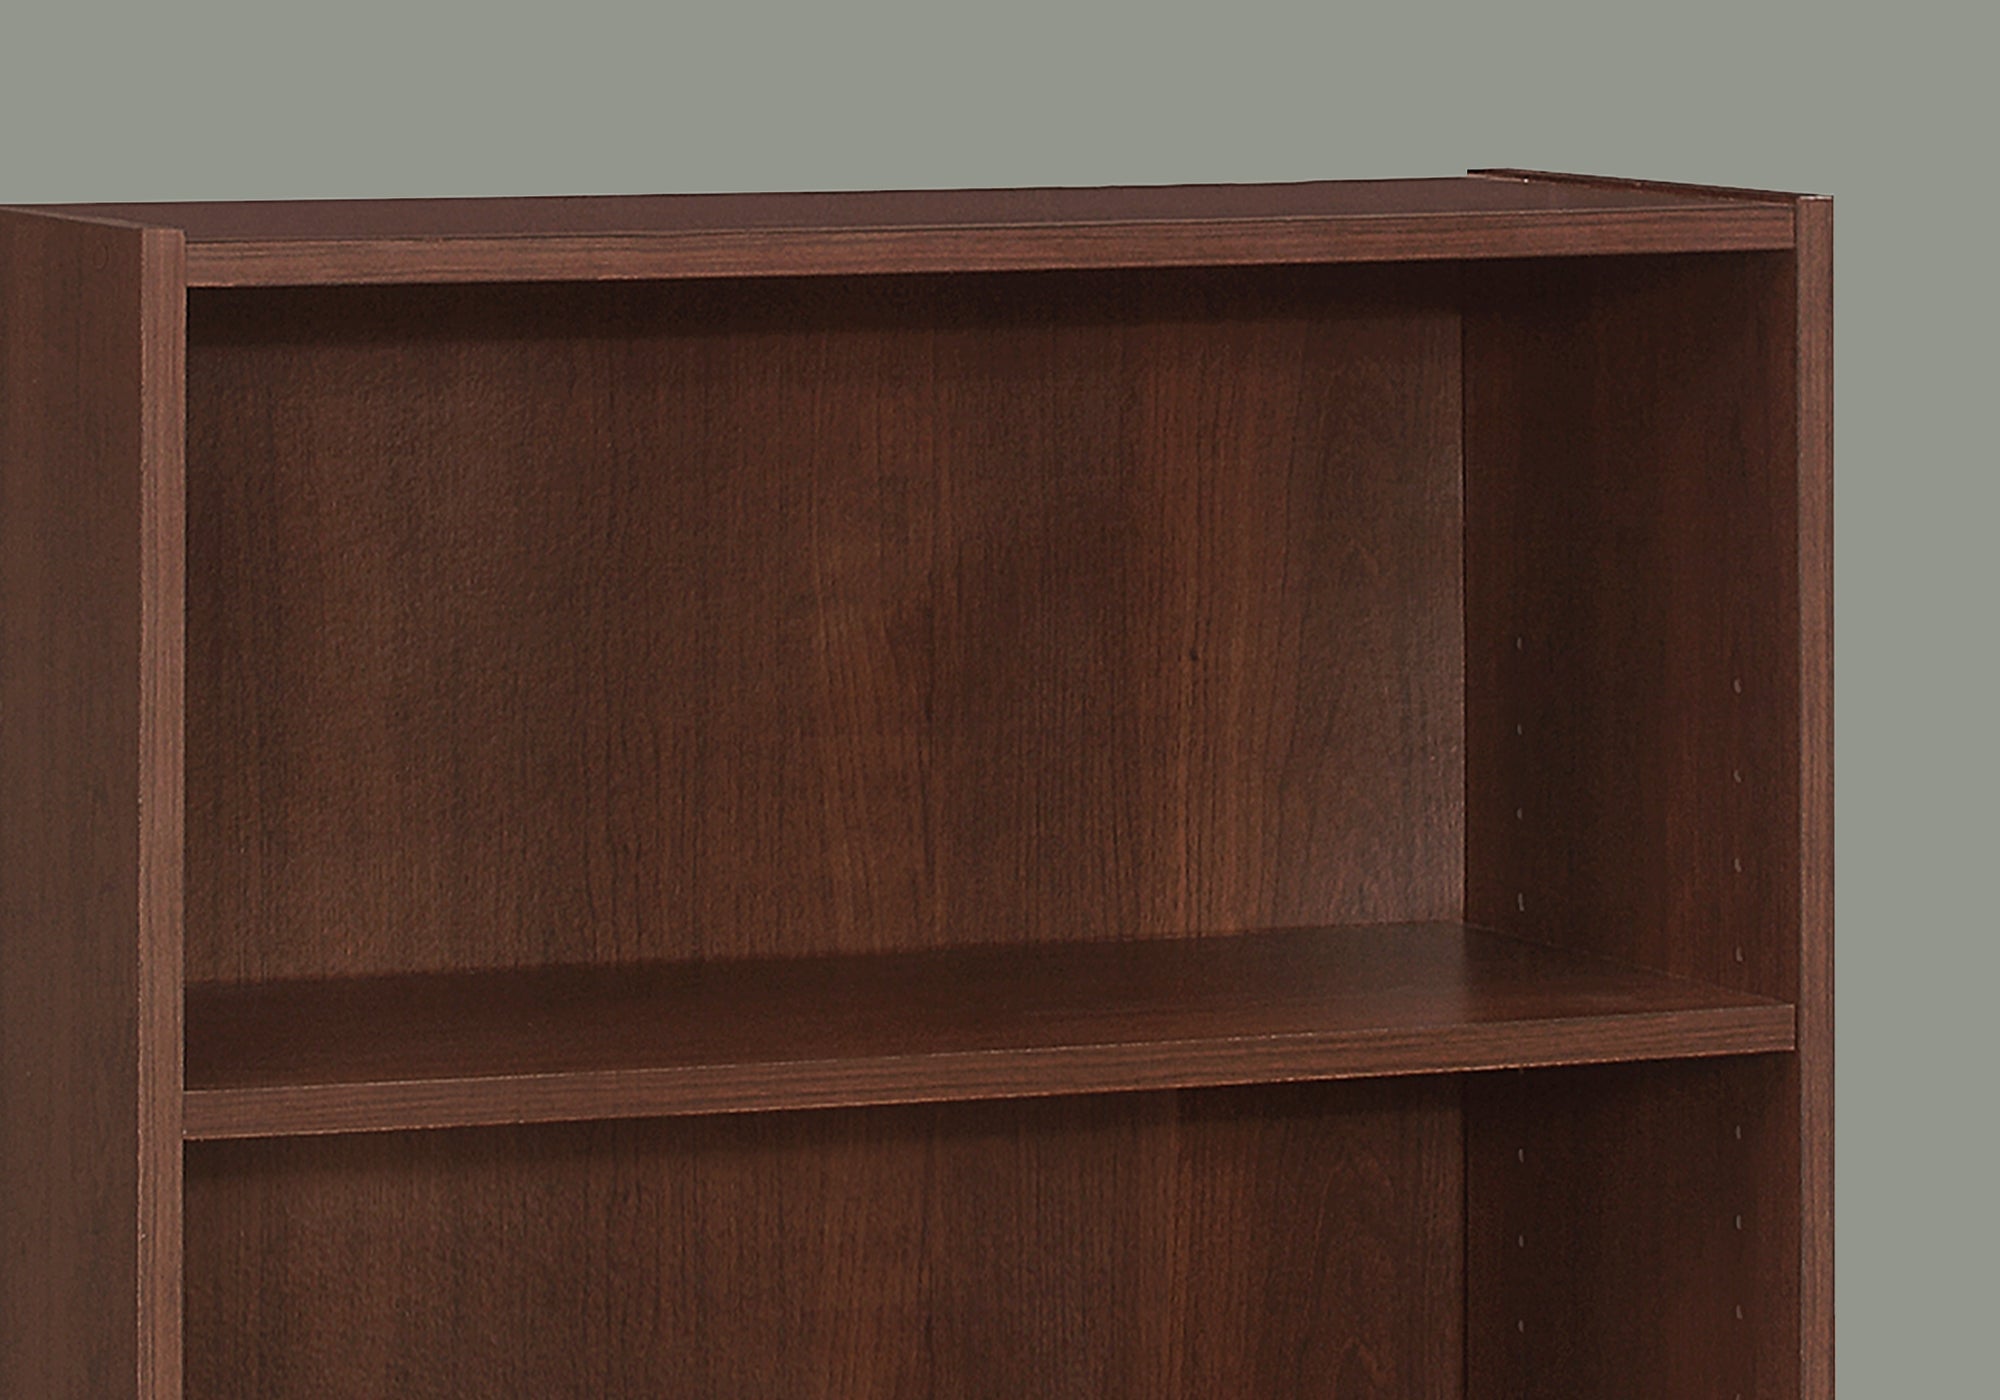 Bookcase - 36H / Cherry With 3 Shelves